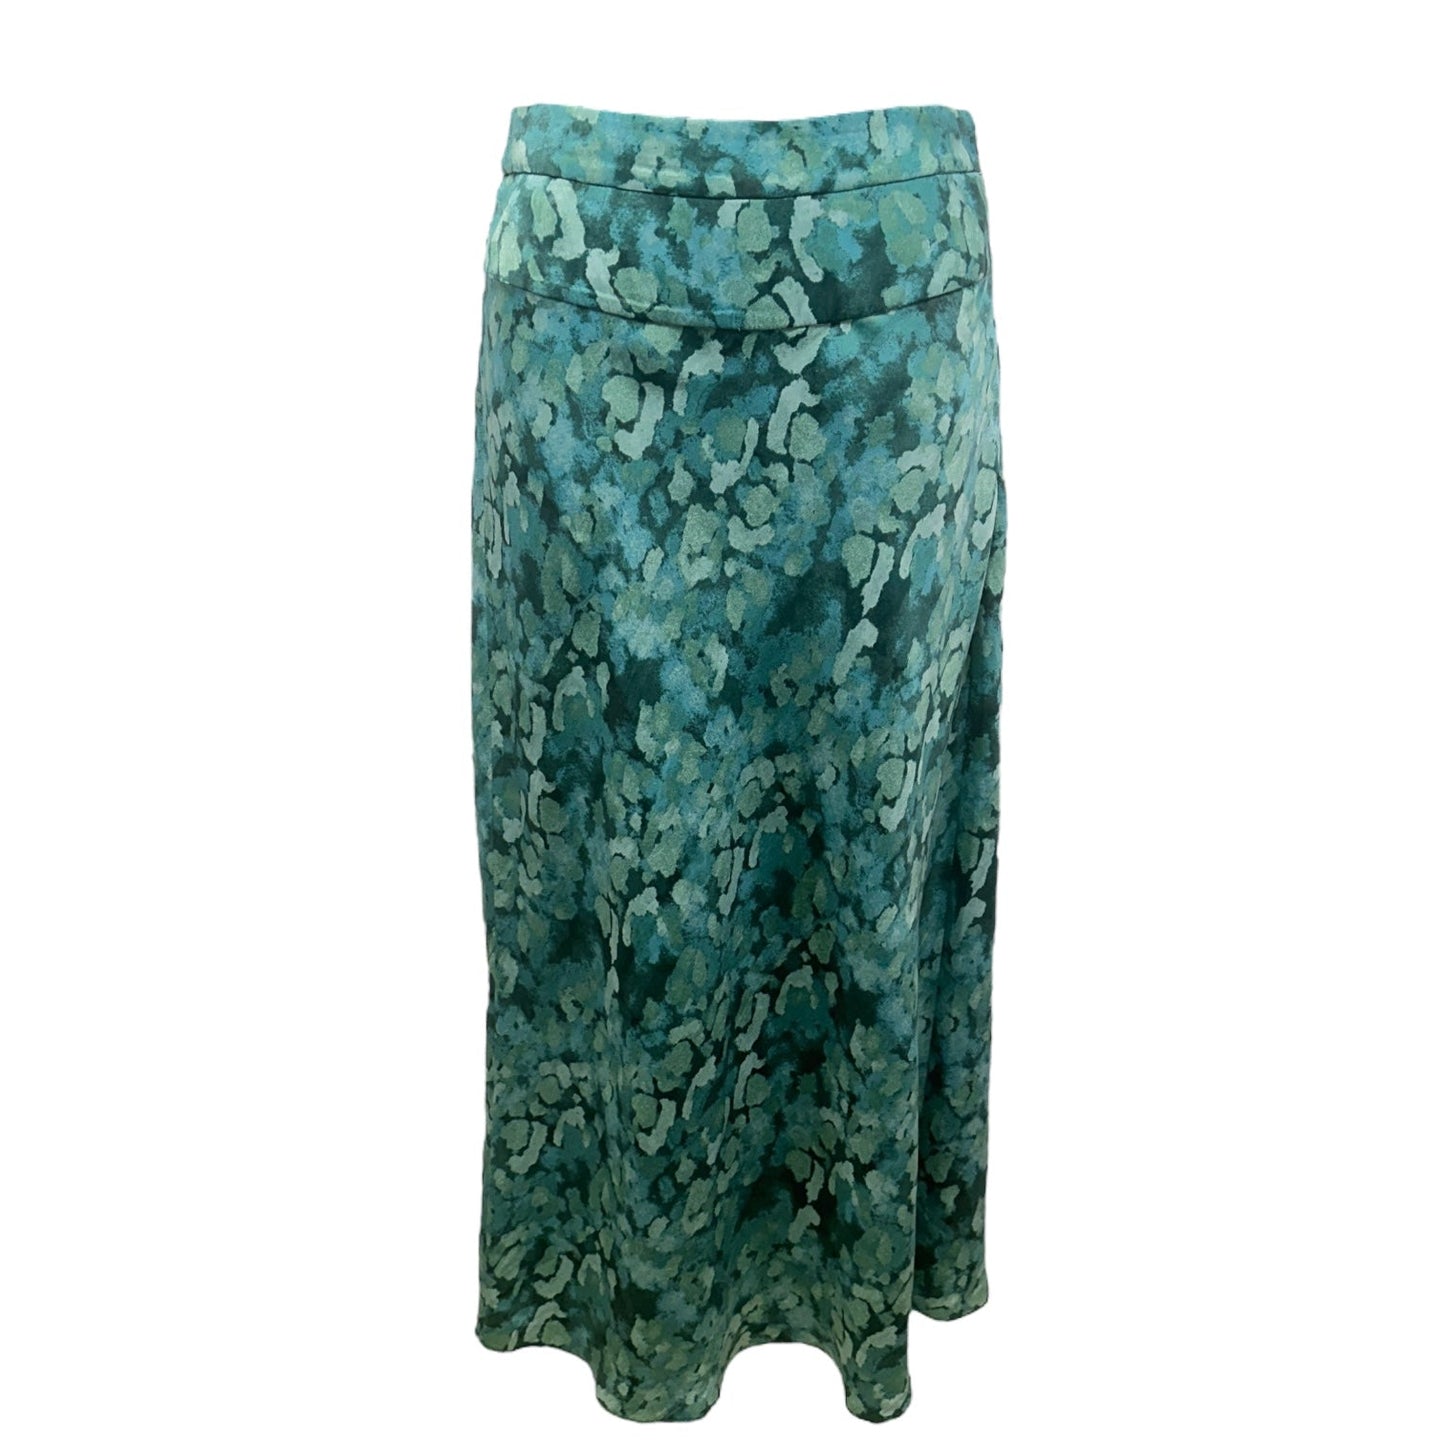 Blue & Green Skirt Maxi Free People, Size 0